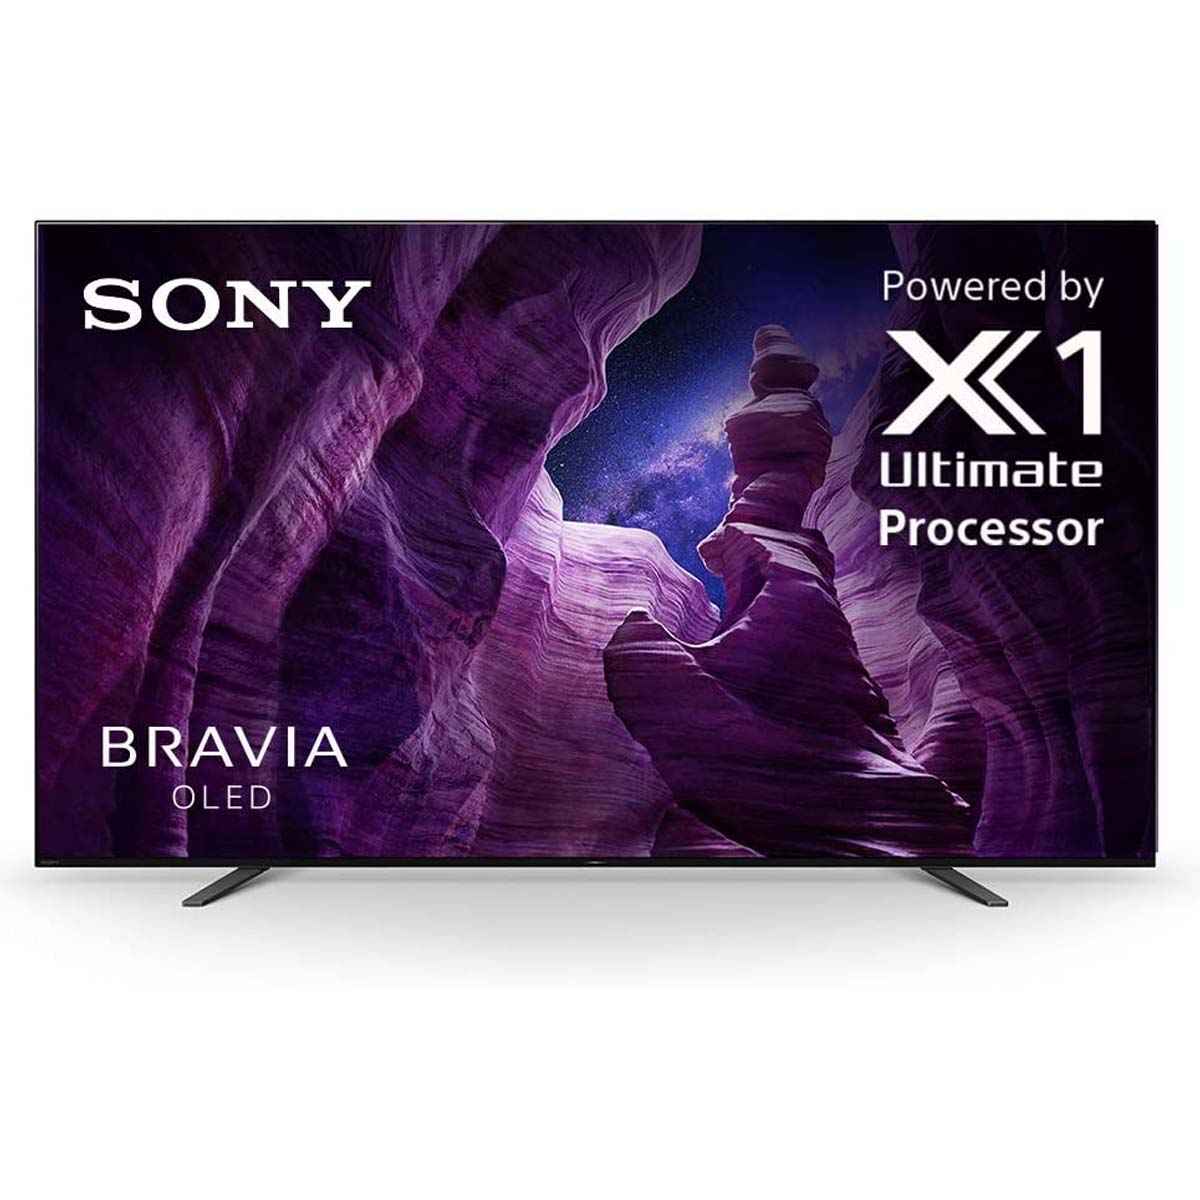 Sony A8H 65-inch 4K OLED TV